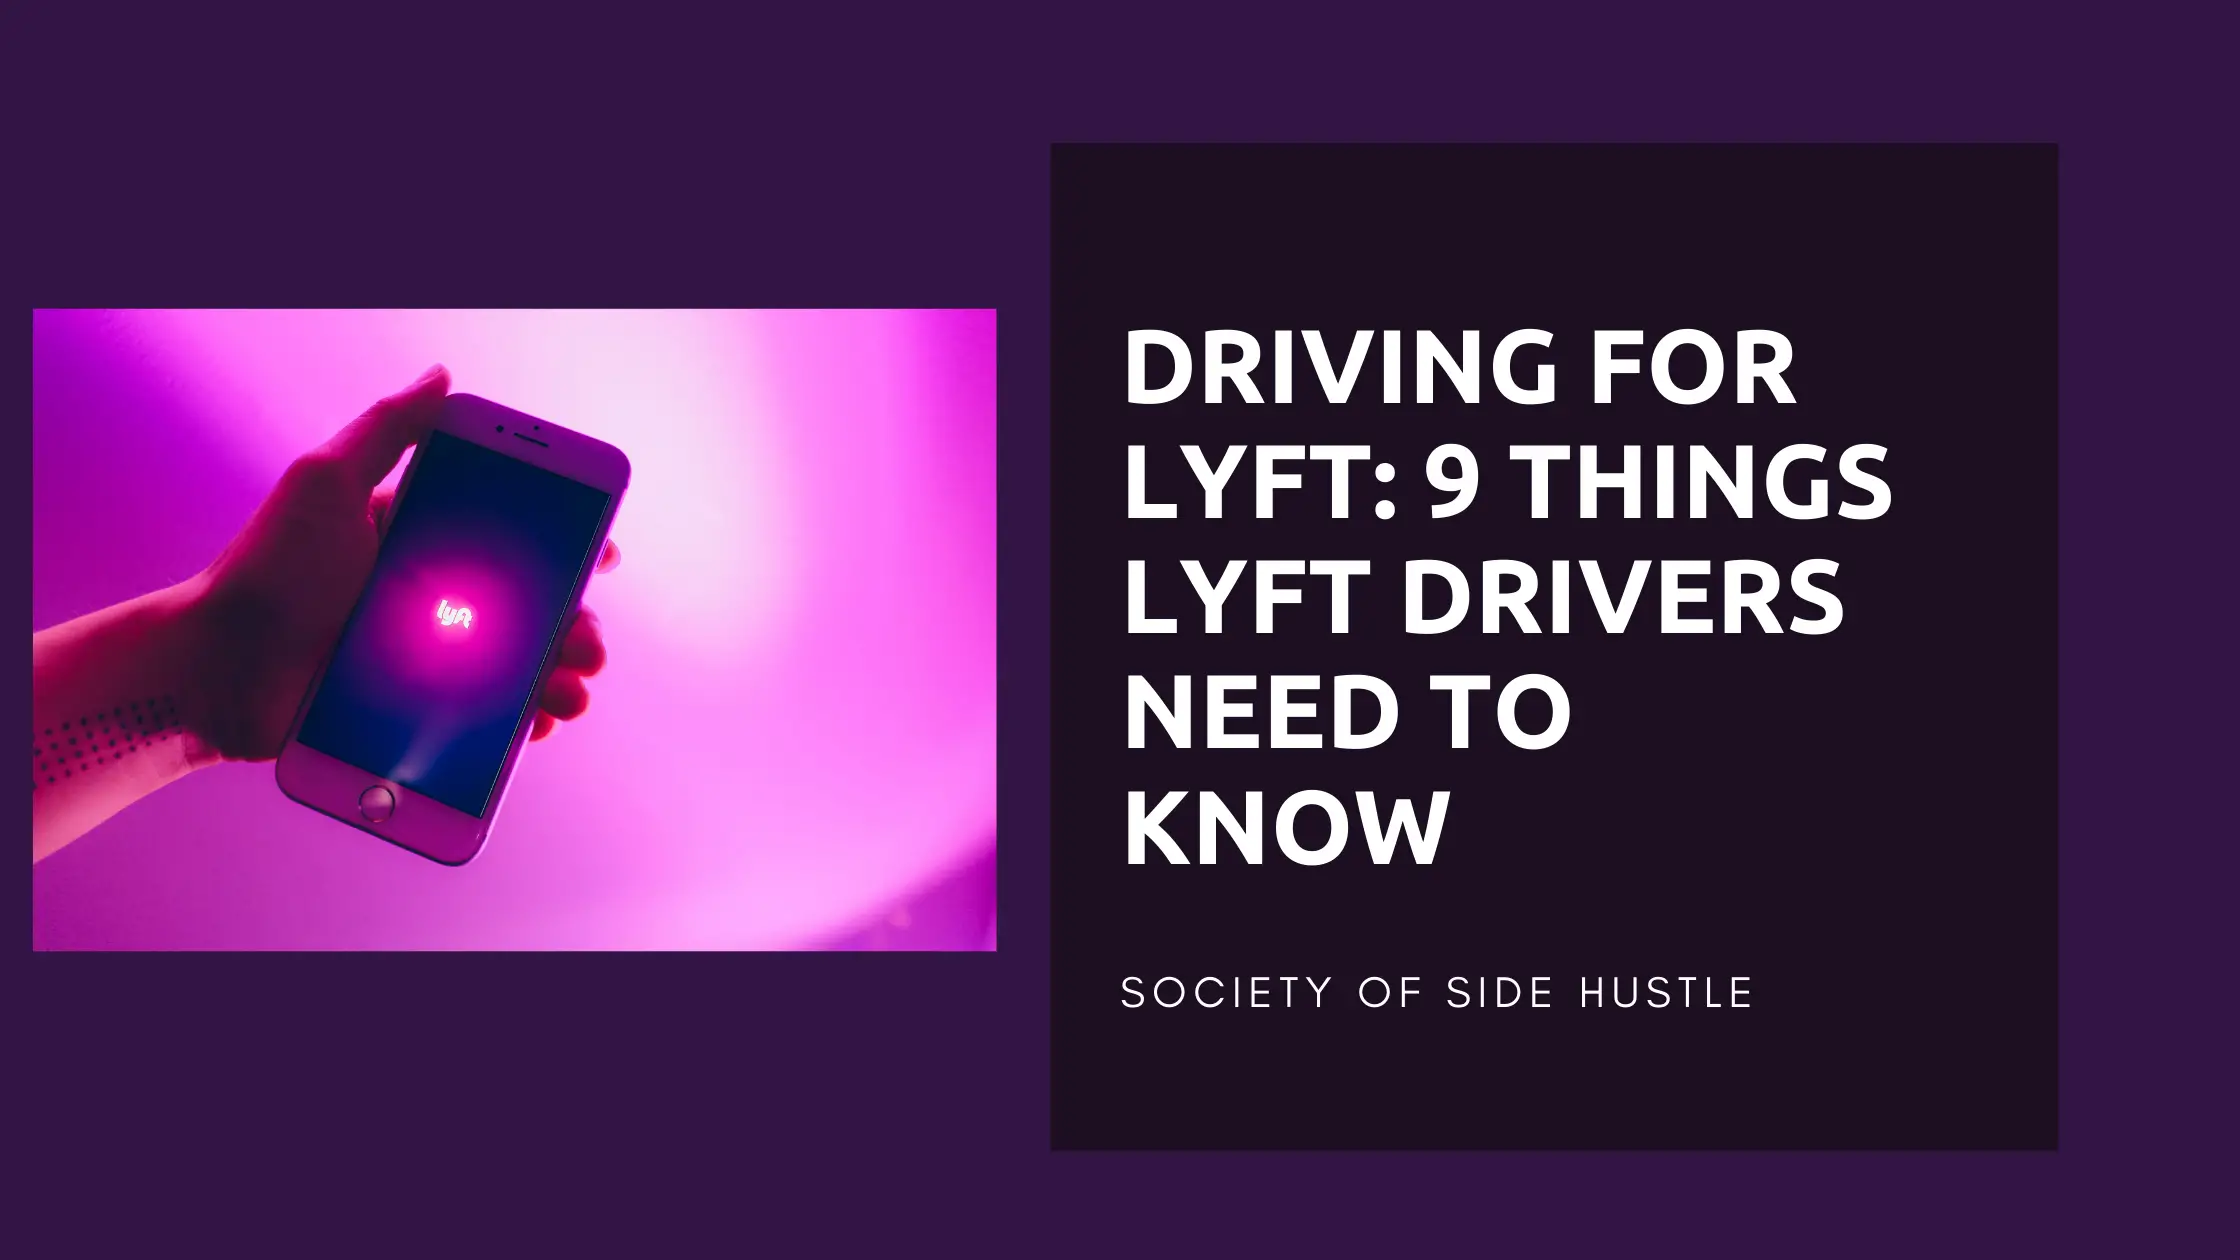 Driving For Lyft: 9 Things Lyft Drivers Need To Know